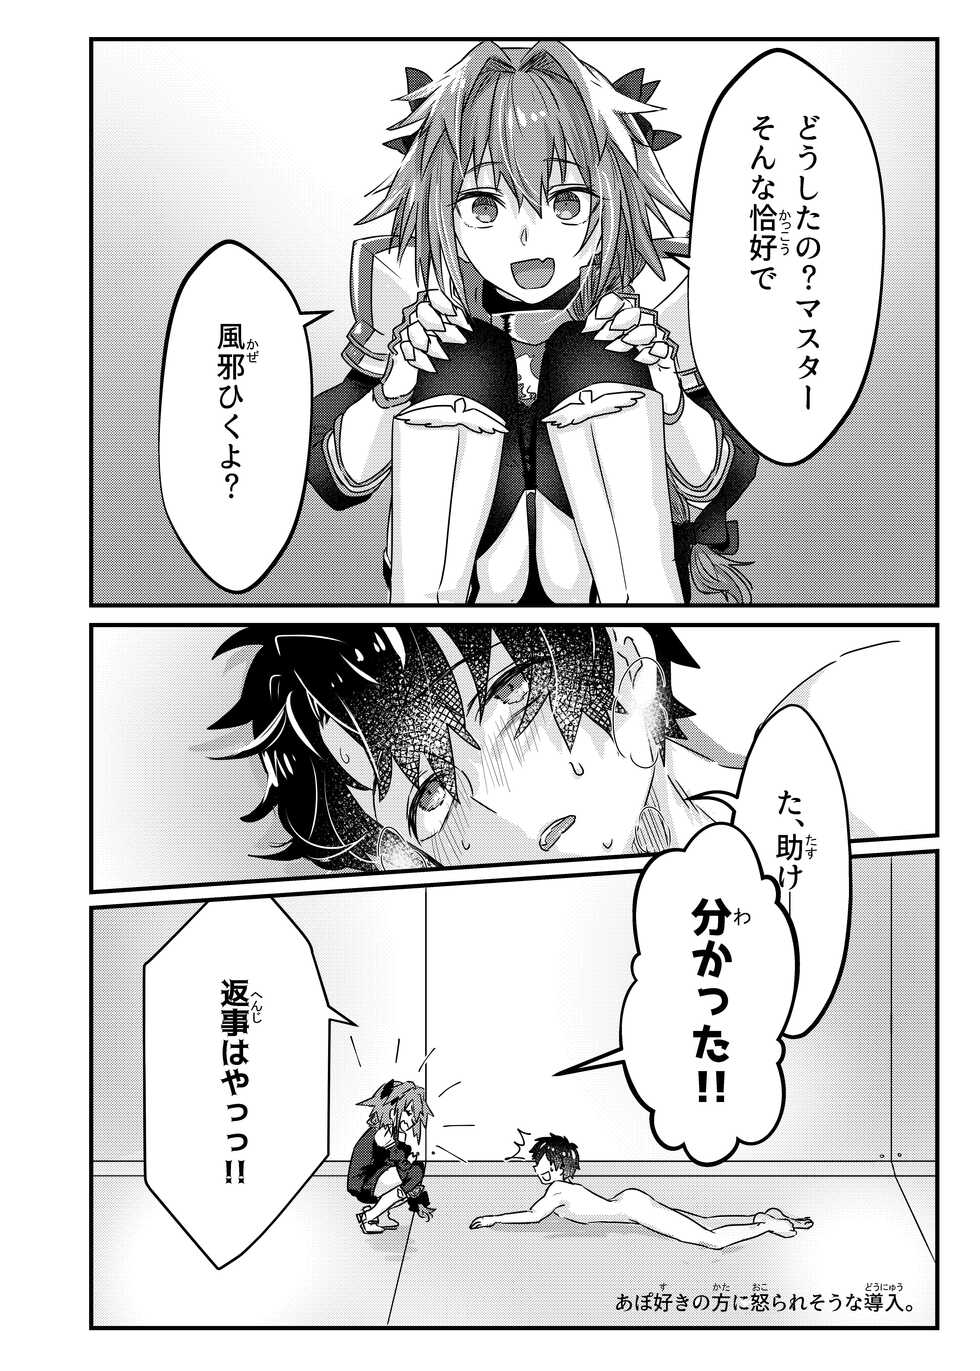 [Oniichan no Imouto (Oniichan no Imouto)] Anal, Anali, Analedomo (Fate/Grand Order) [Digital] - Page 23